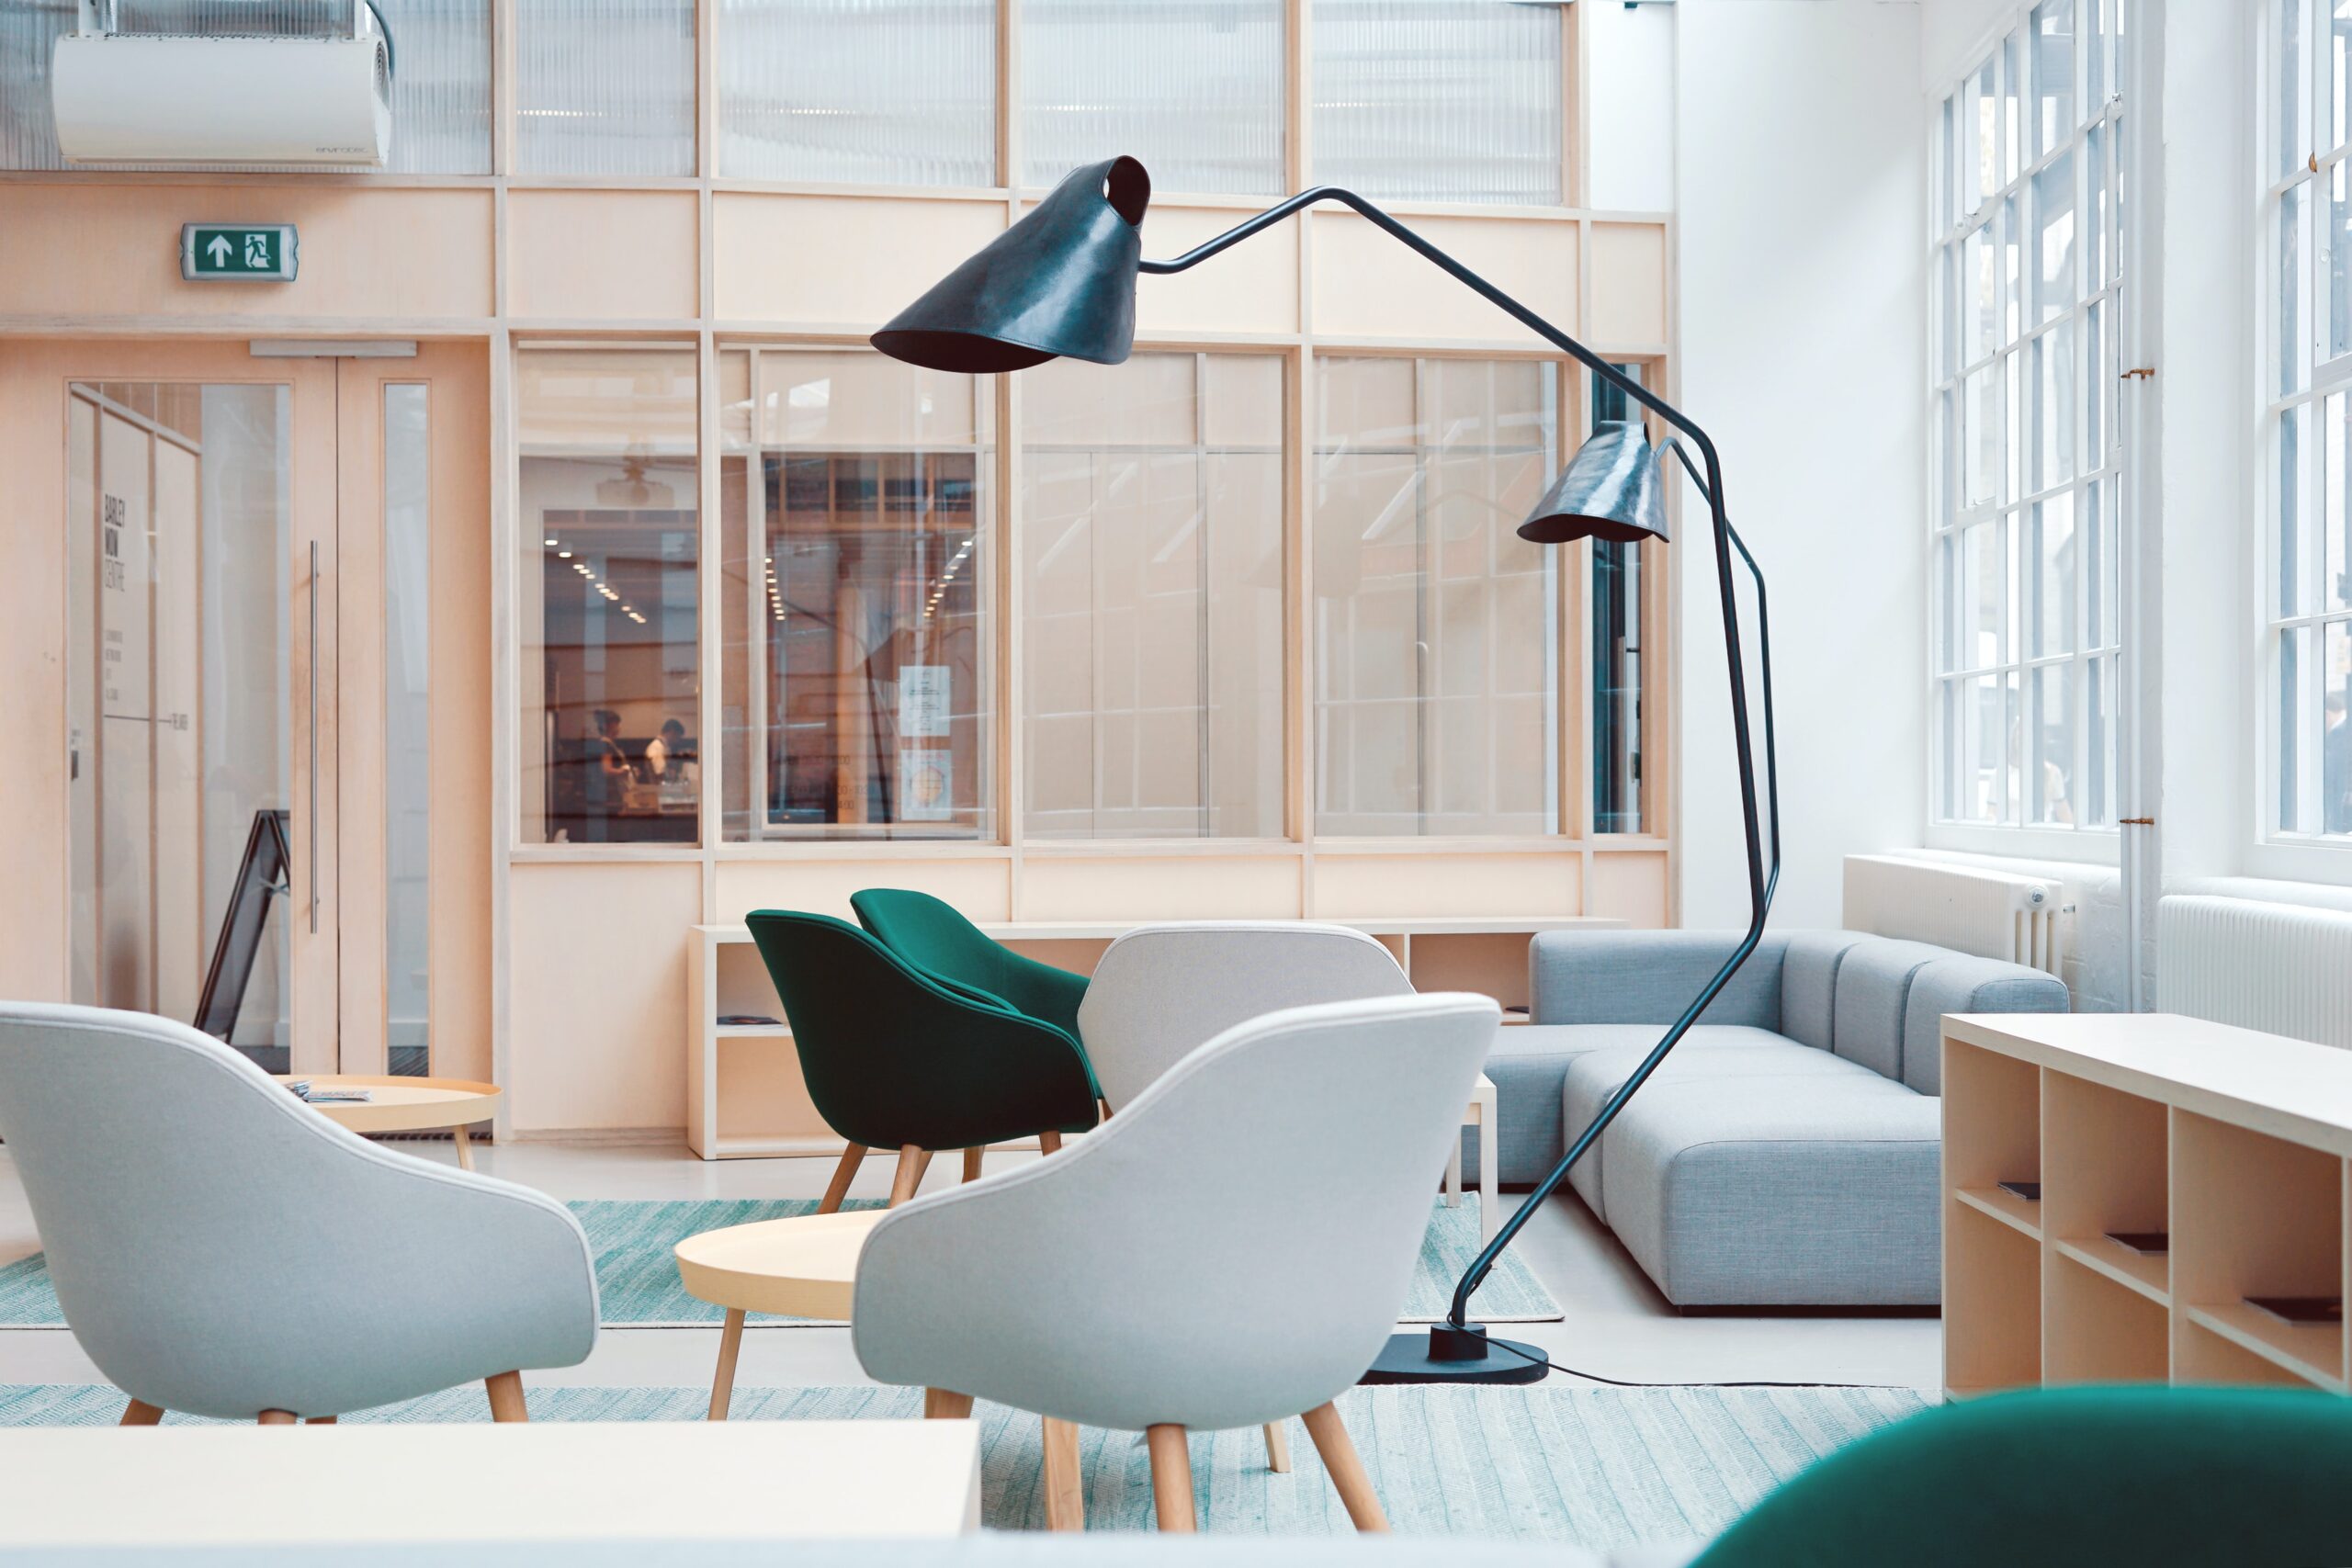 German Benner Single Family Office Acquires Furniture Manufacturer THONET